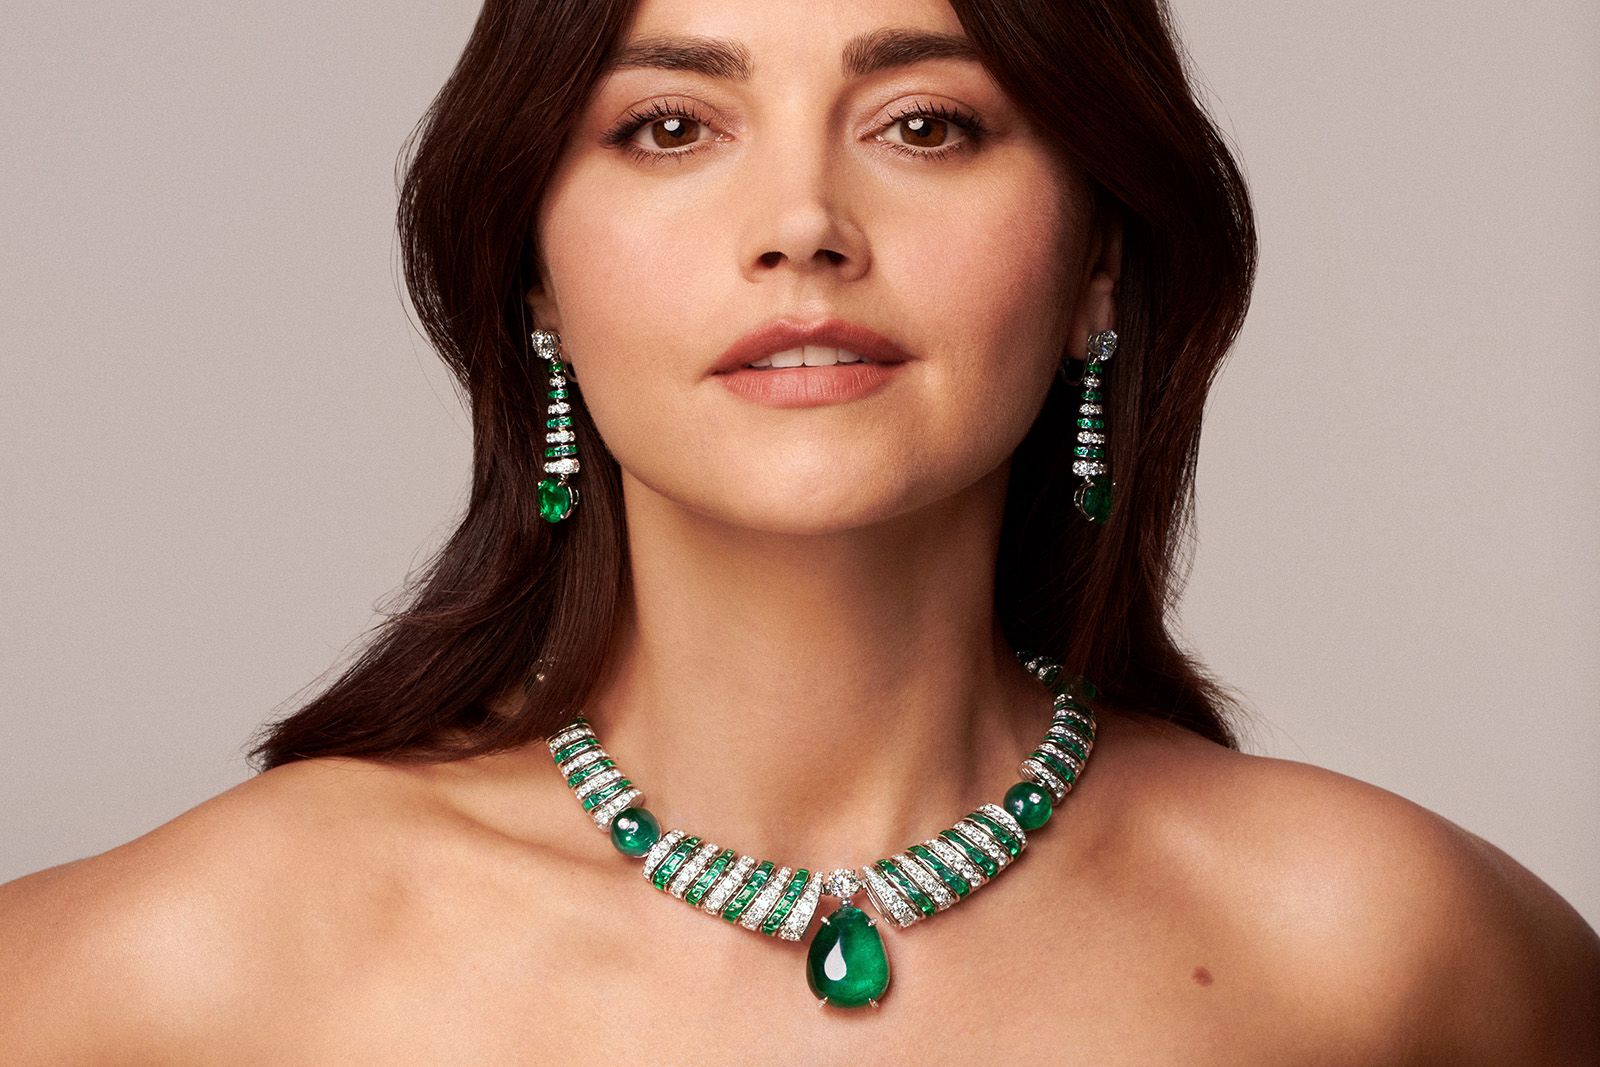 Bvlgari's Magnifica High Jewellery collection is a resplendent affair